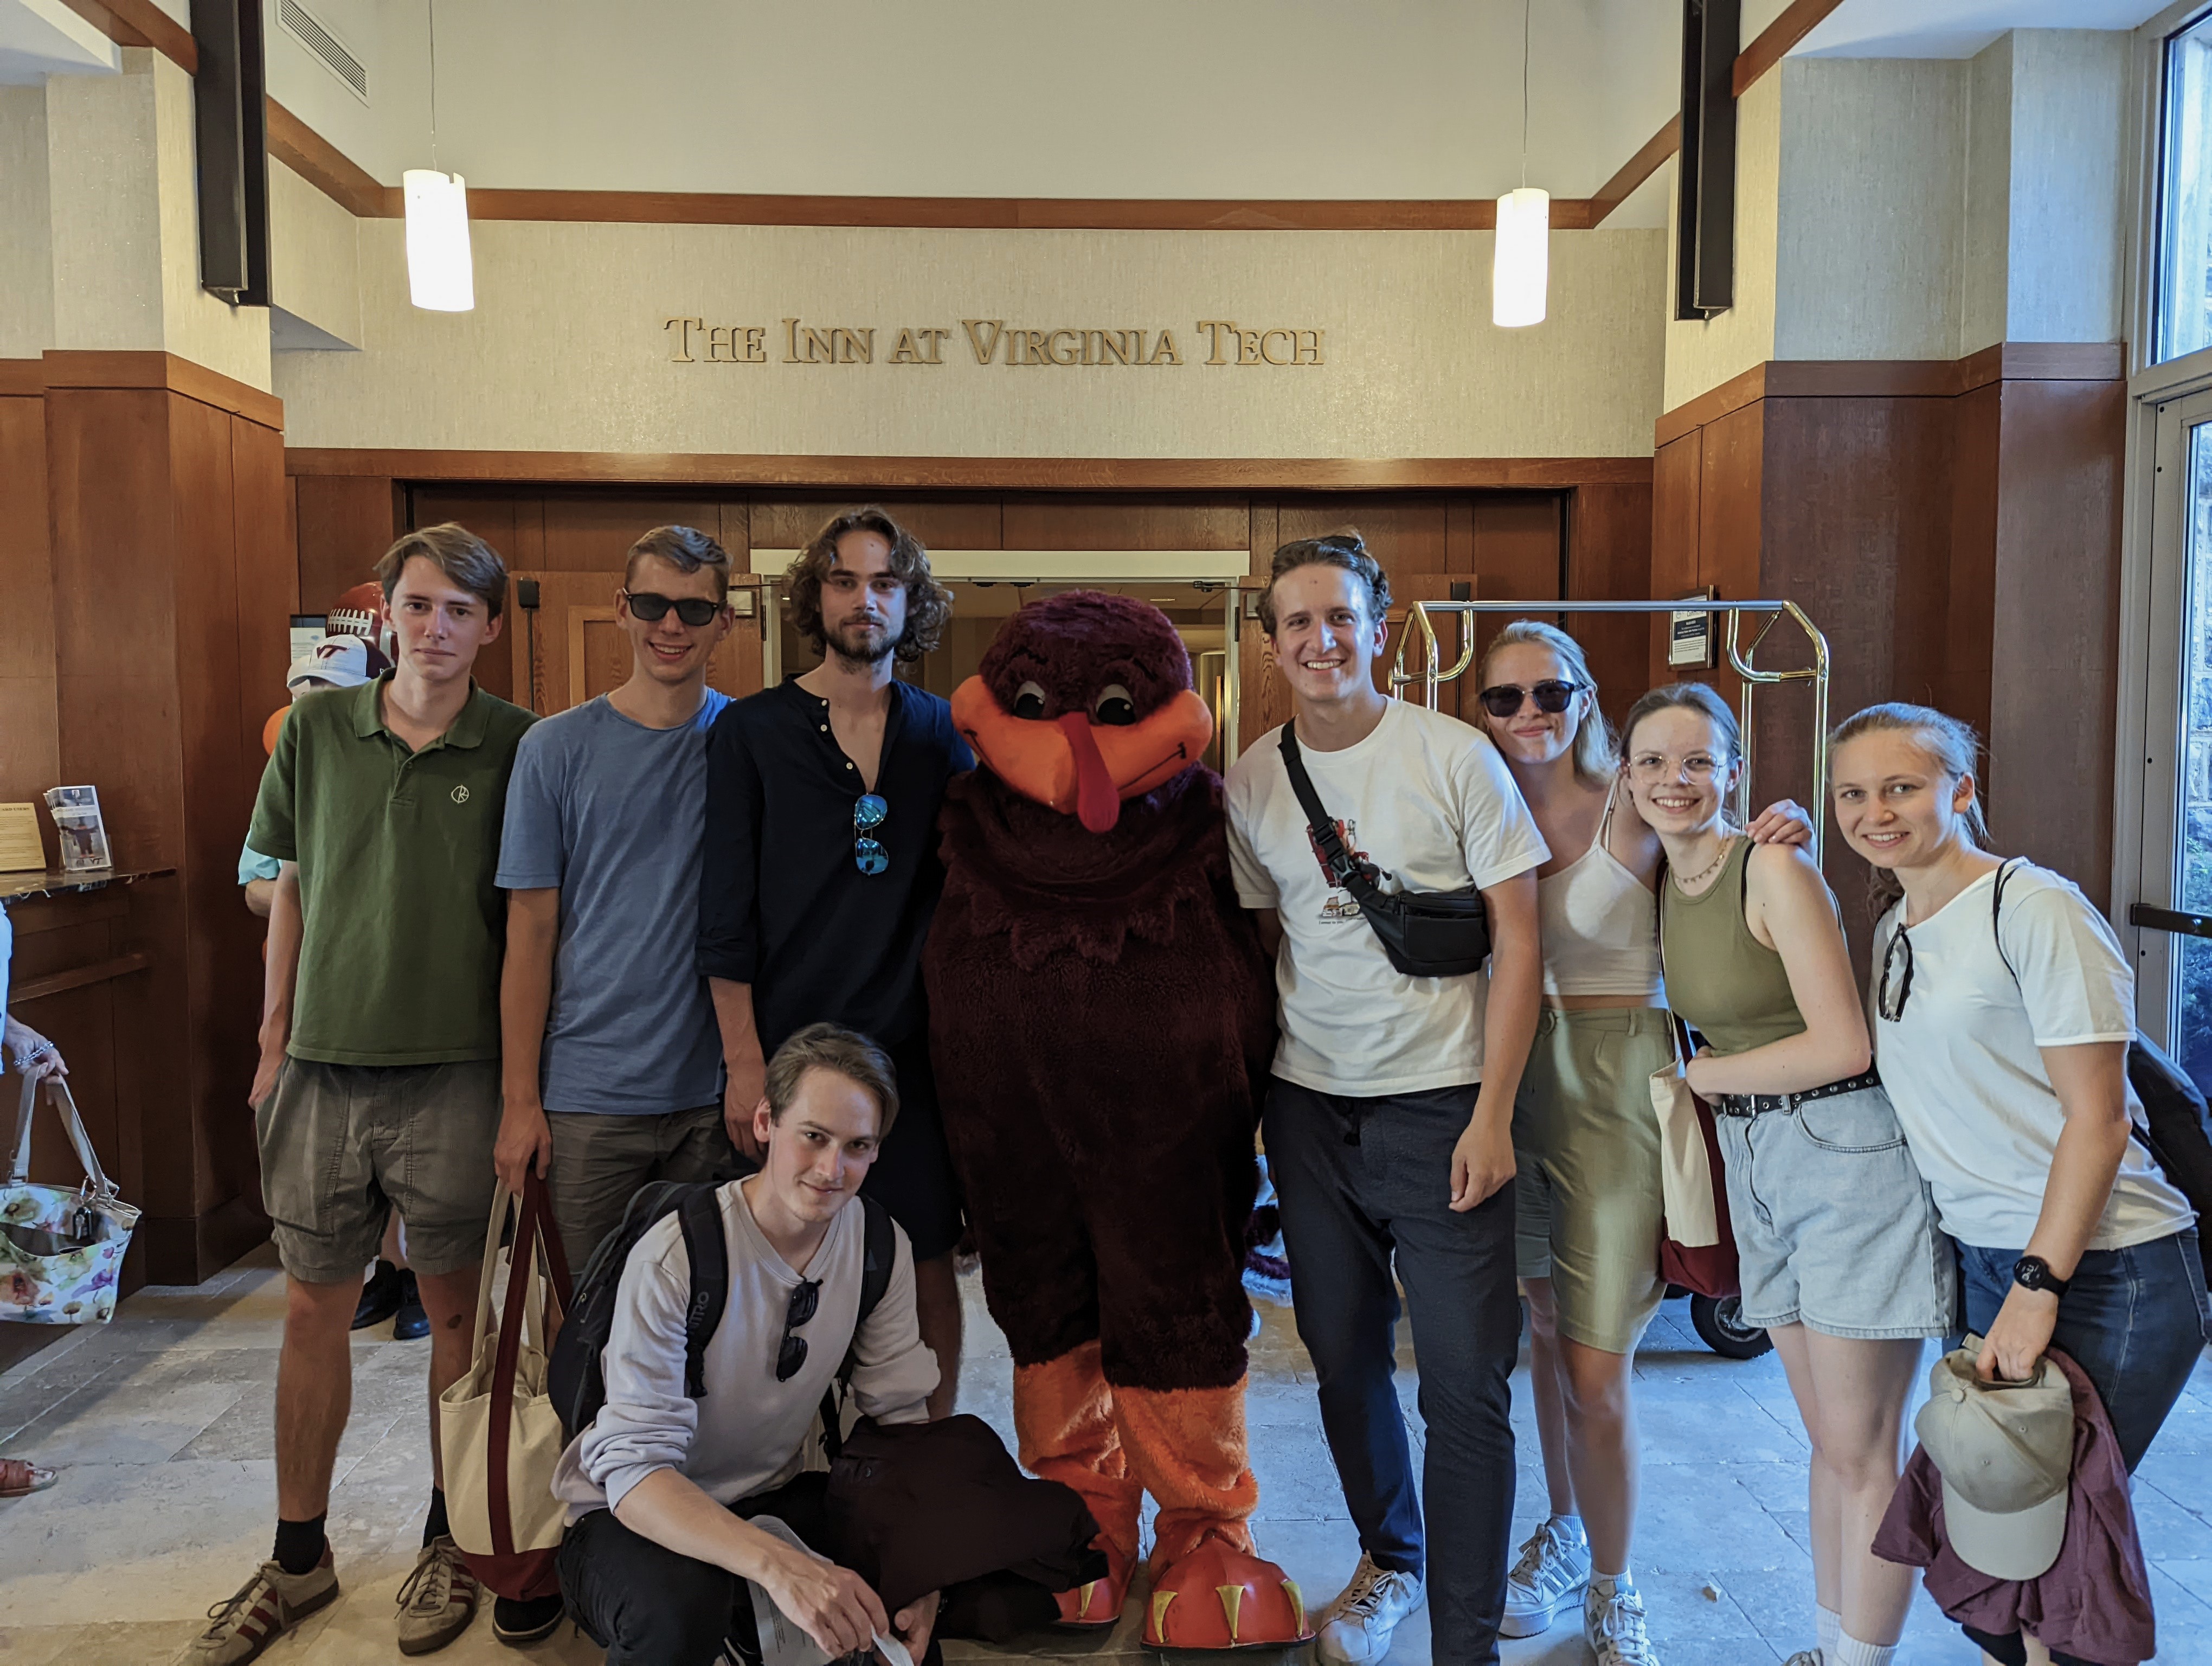 Group picture with the Hokie Bird at the Inn.